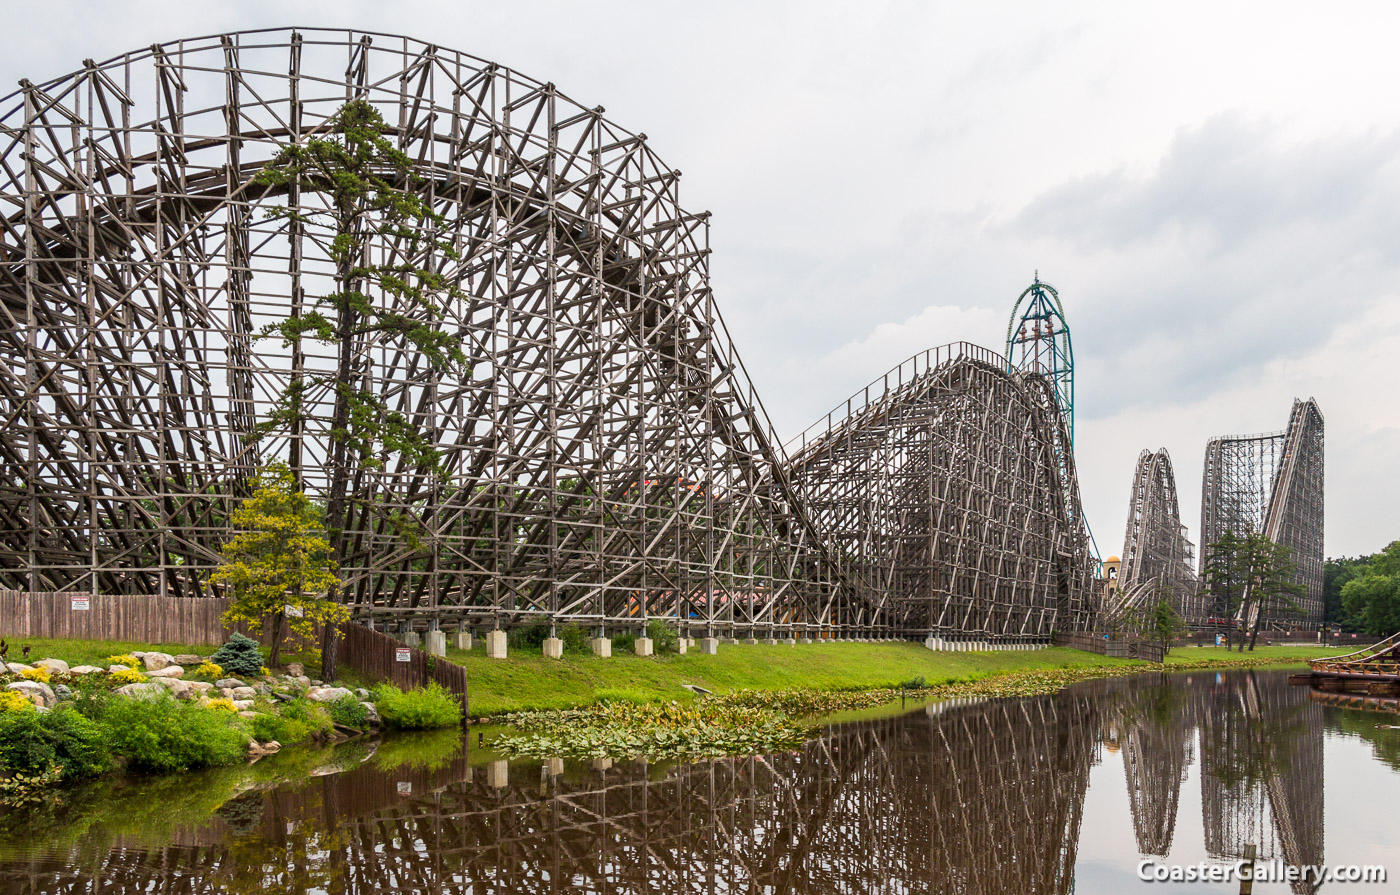 A description and photograph of the cars on the El Toro wooden roller coaster